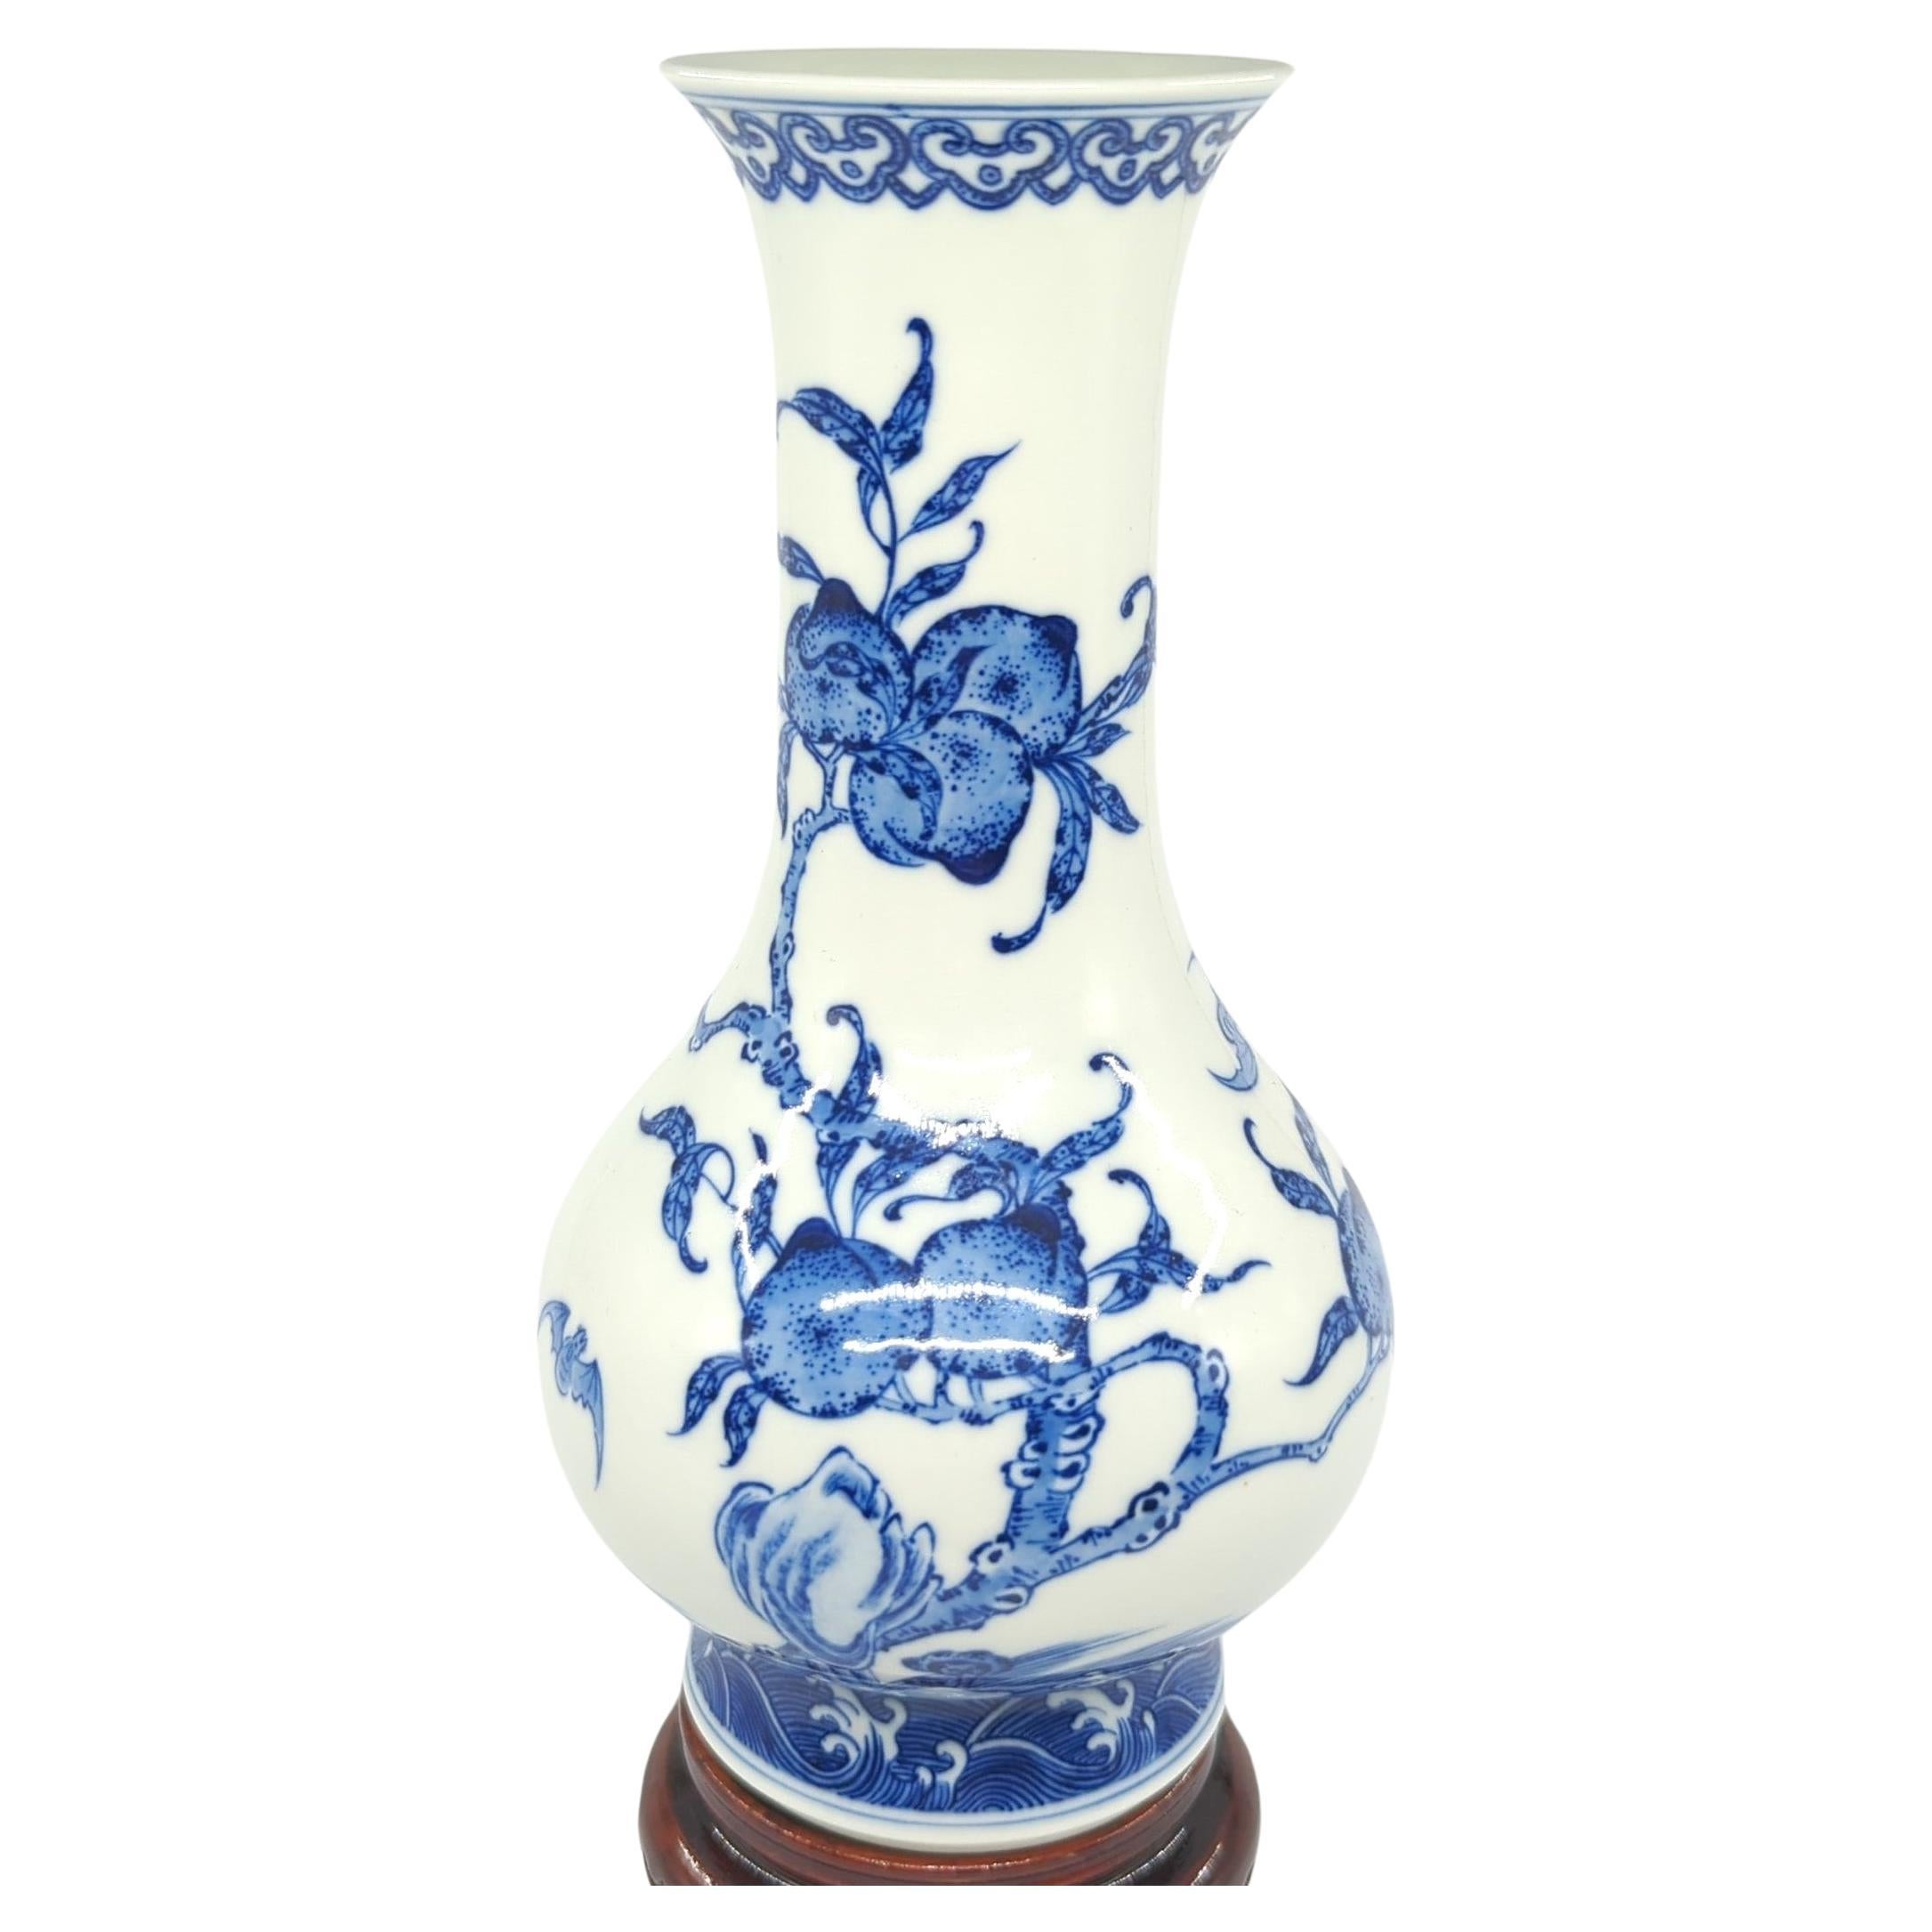 This finely painted Chinese porcelain vase is a masterful representation of Qing style, executed in underglaze blue and white. The vase takes on a classic bottle form, characterized by an outward flaring mouth rim that adds a touch of elegance to